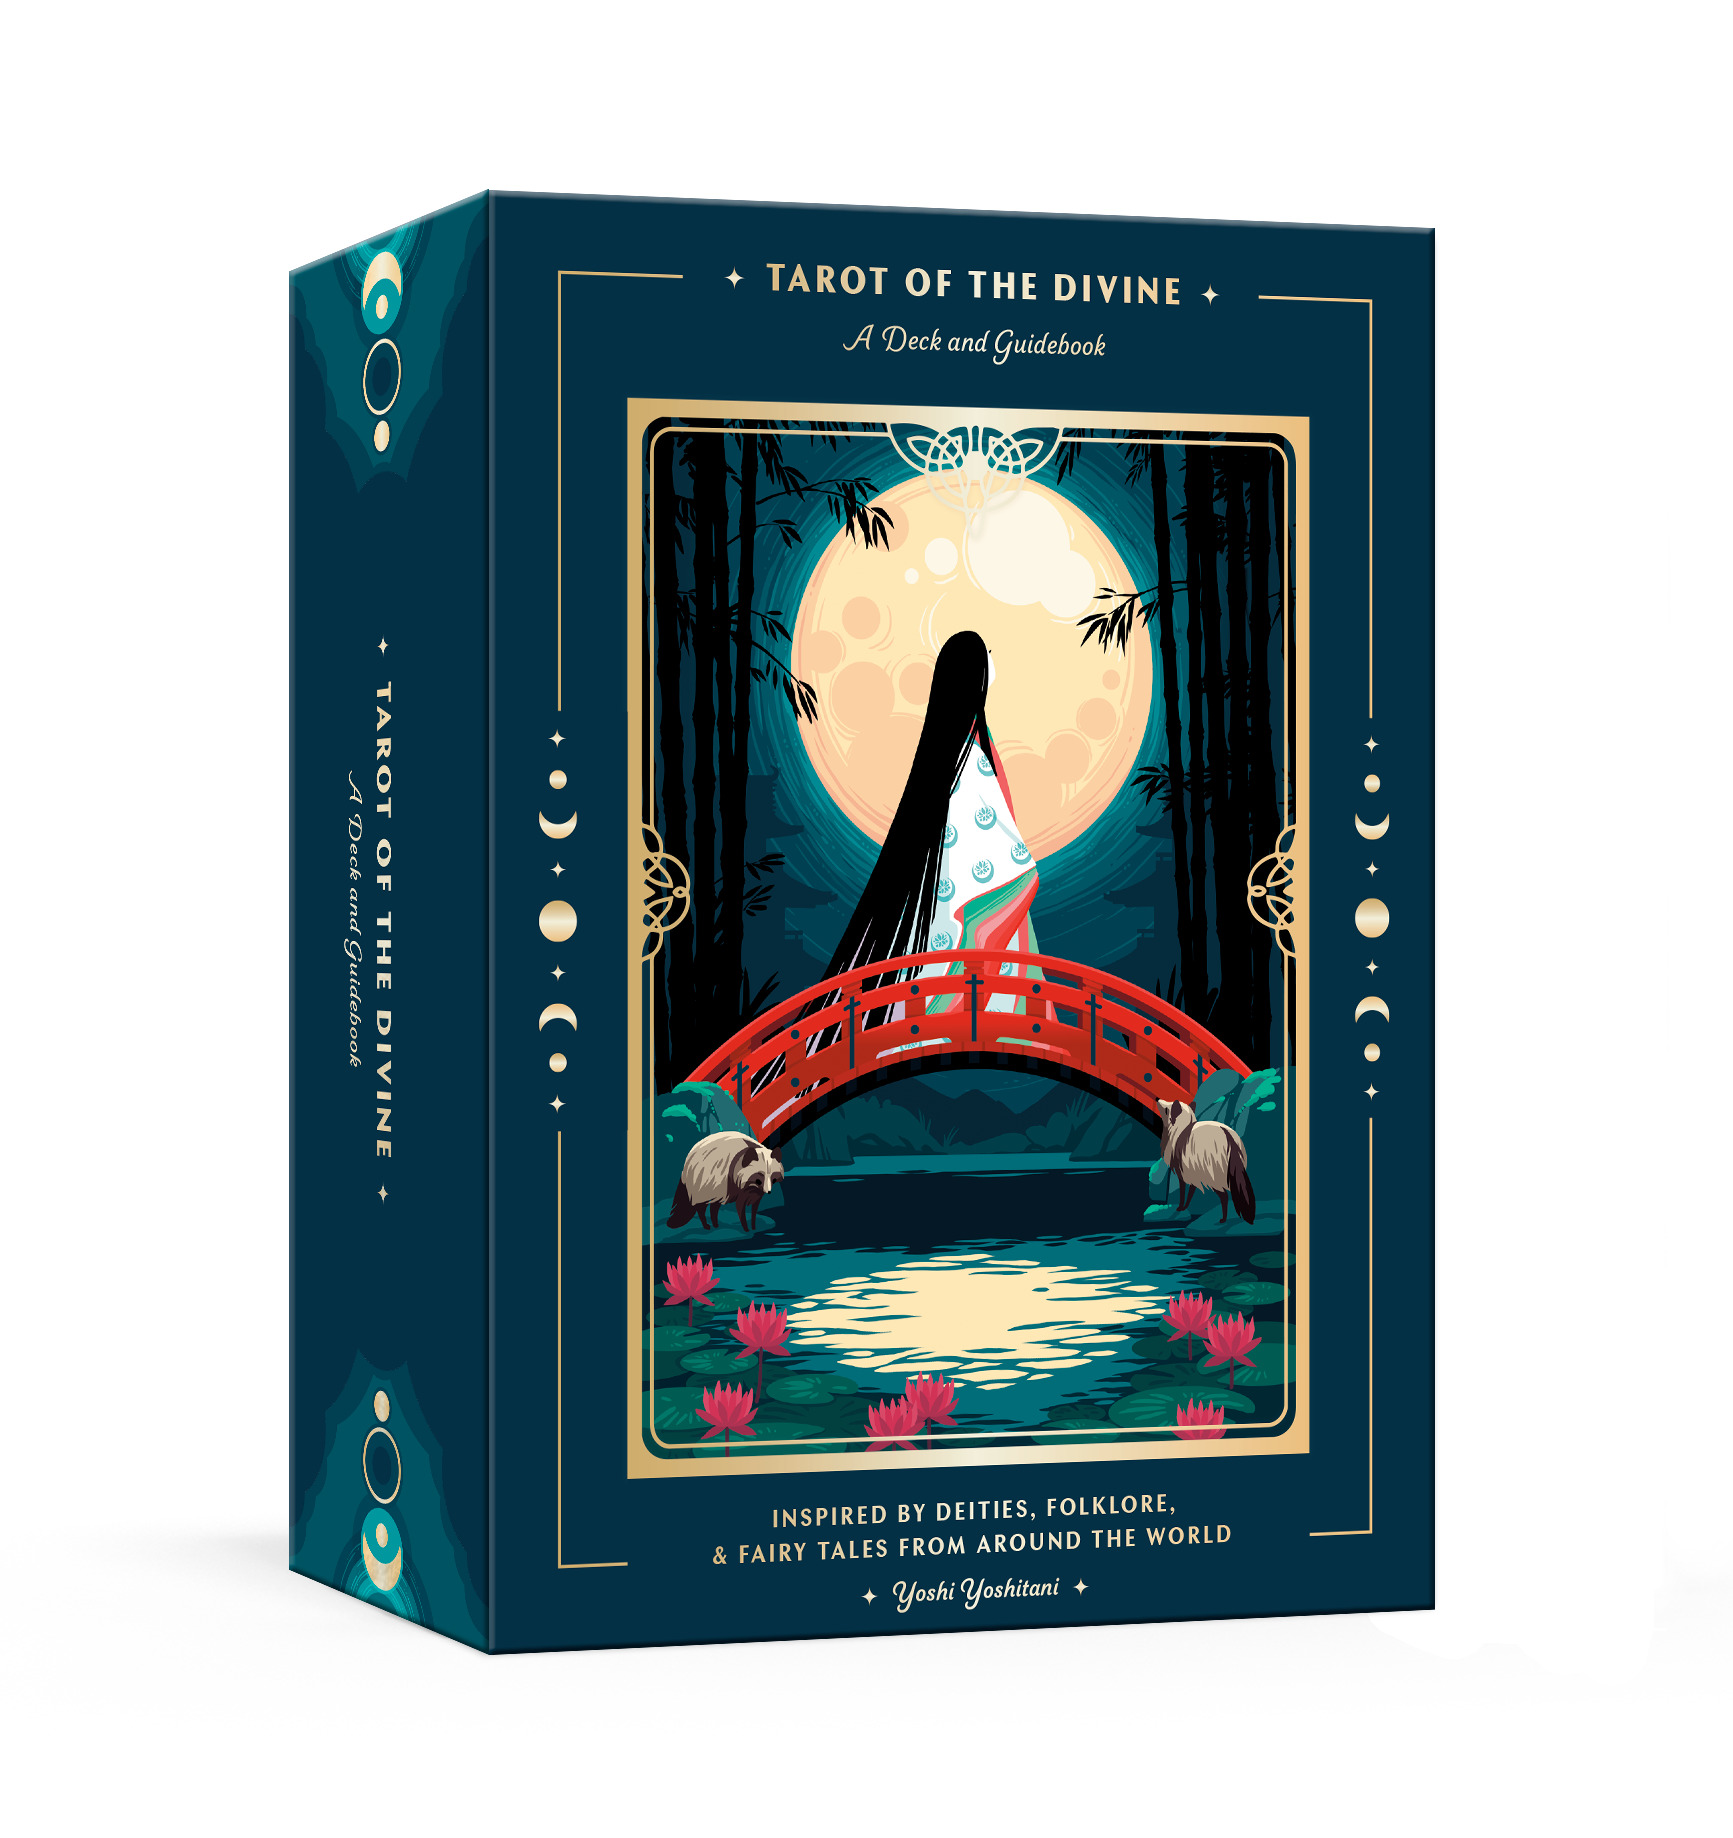 Tarot of the Divine : A Deck and Guidebook Inspired by Deities, Folklore, and Fairy Tales from Around the World: Tarot Cards | Yoshitani, Yoshi